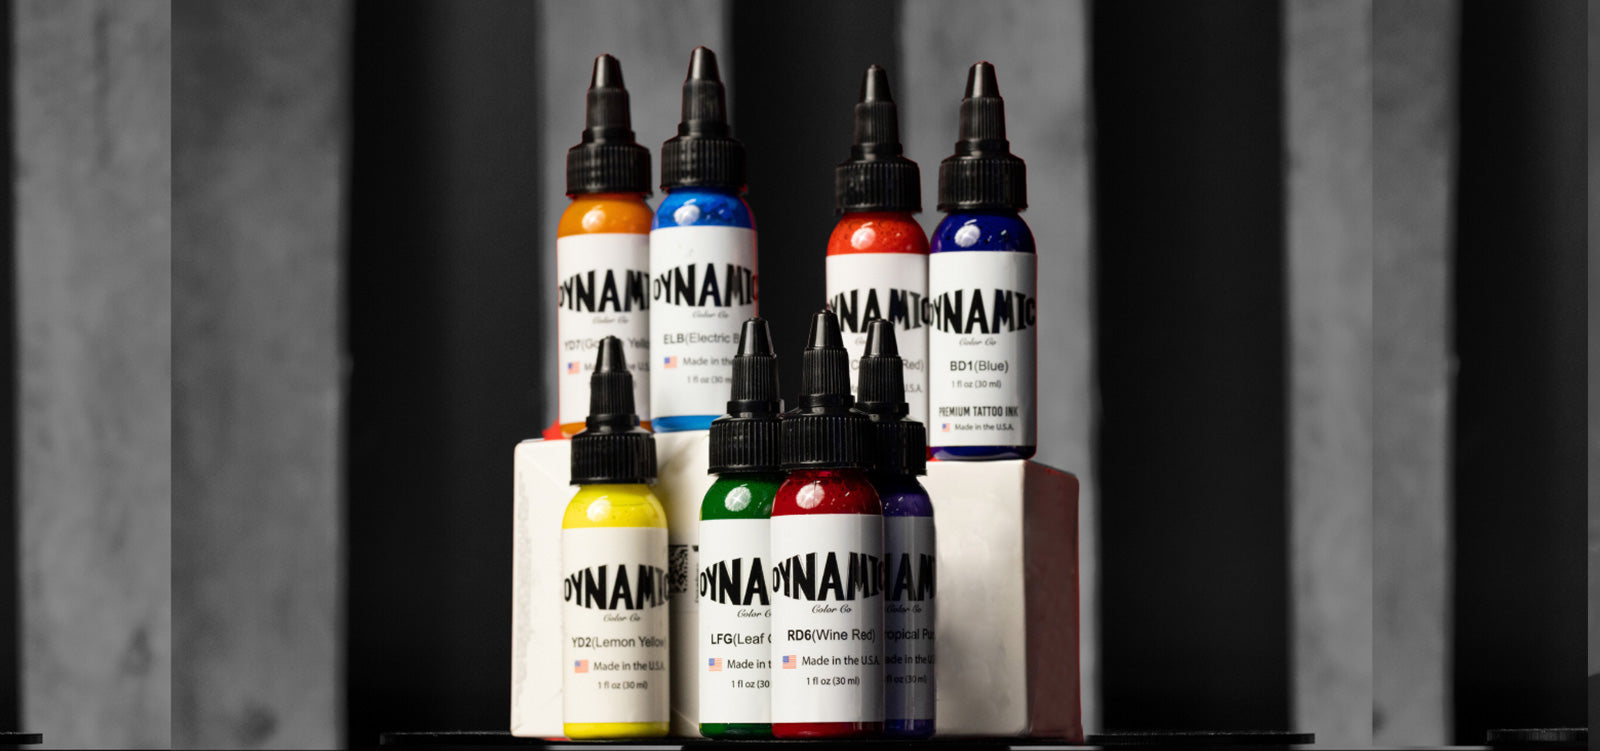  Dynamic Color Co - OG Color Ink Set, 12 Bottles (1 oz Each)  Includes: (Burgundy Red, Chinese Red, Fire Red, Green, Blue, Orange, White,  Canary Yellow, Brown, Magenta, Violet, and Black) 